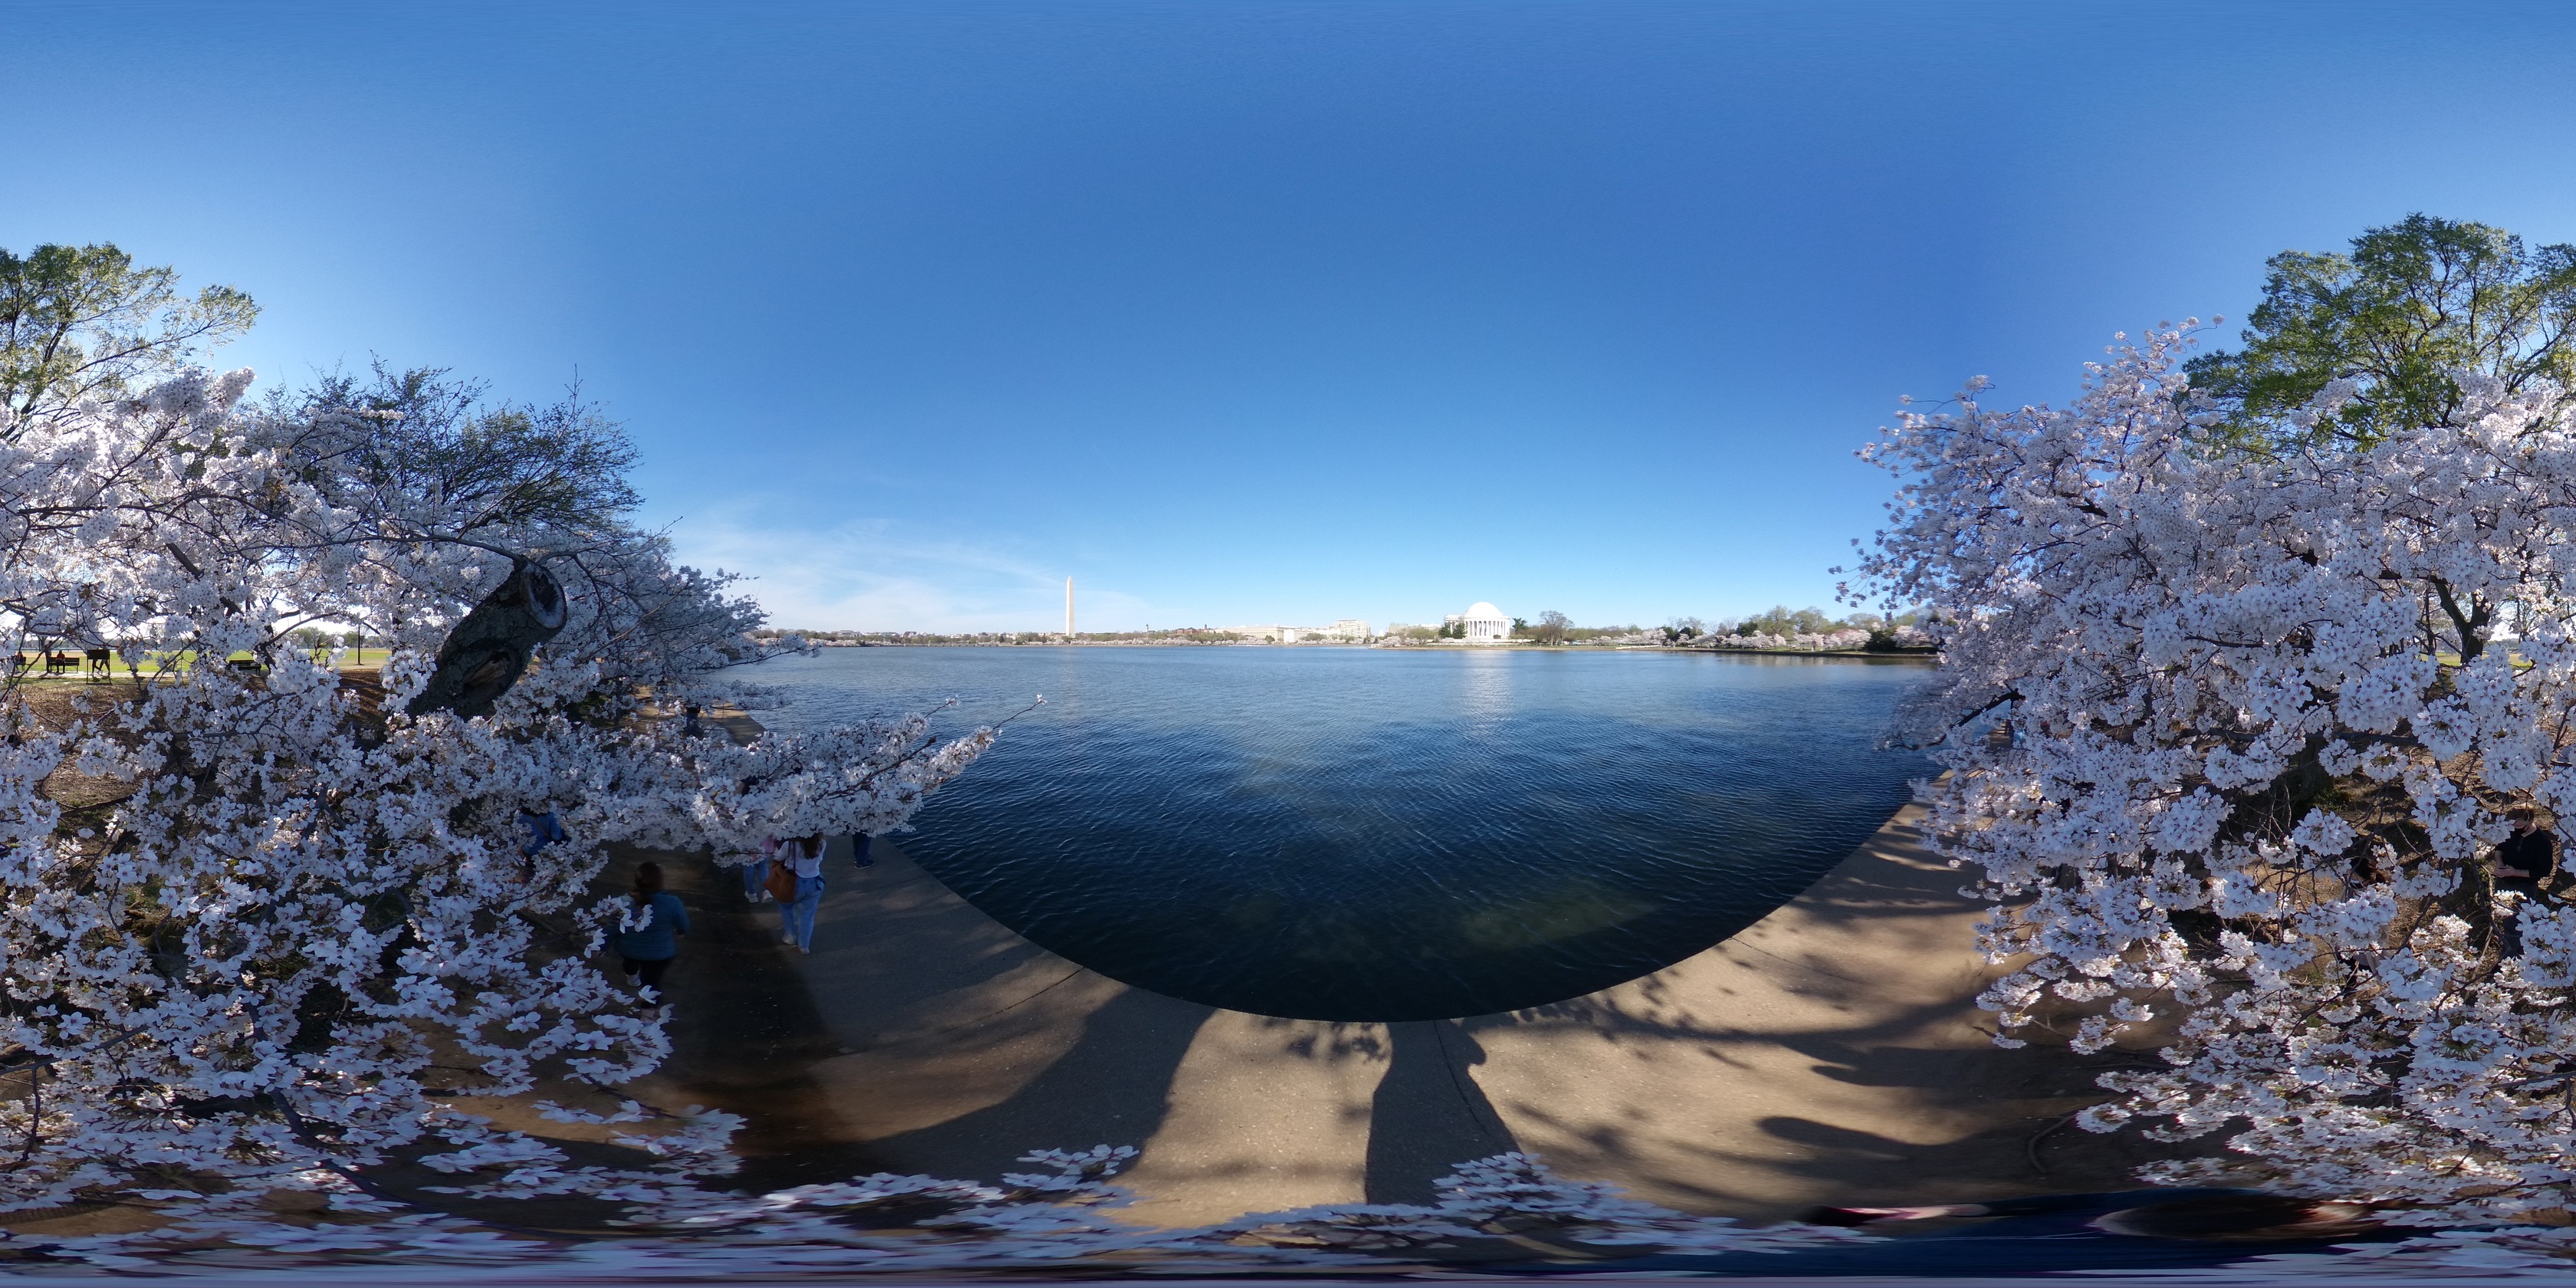 A spherical photo of a park area that includes people walking on a path next to a large tidal basin also lined with cherry blossom trees in full bloom. The Washington Monument and Thomas Jefferson Memorial are in the distance across the tidal basin.  